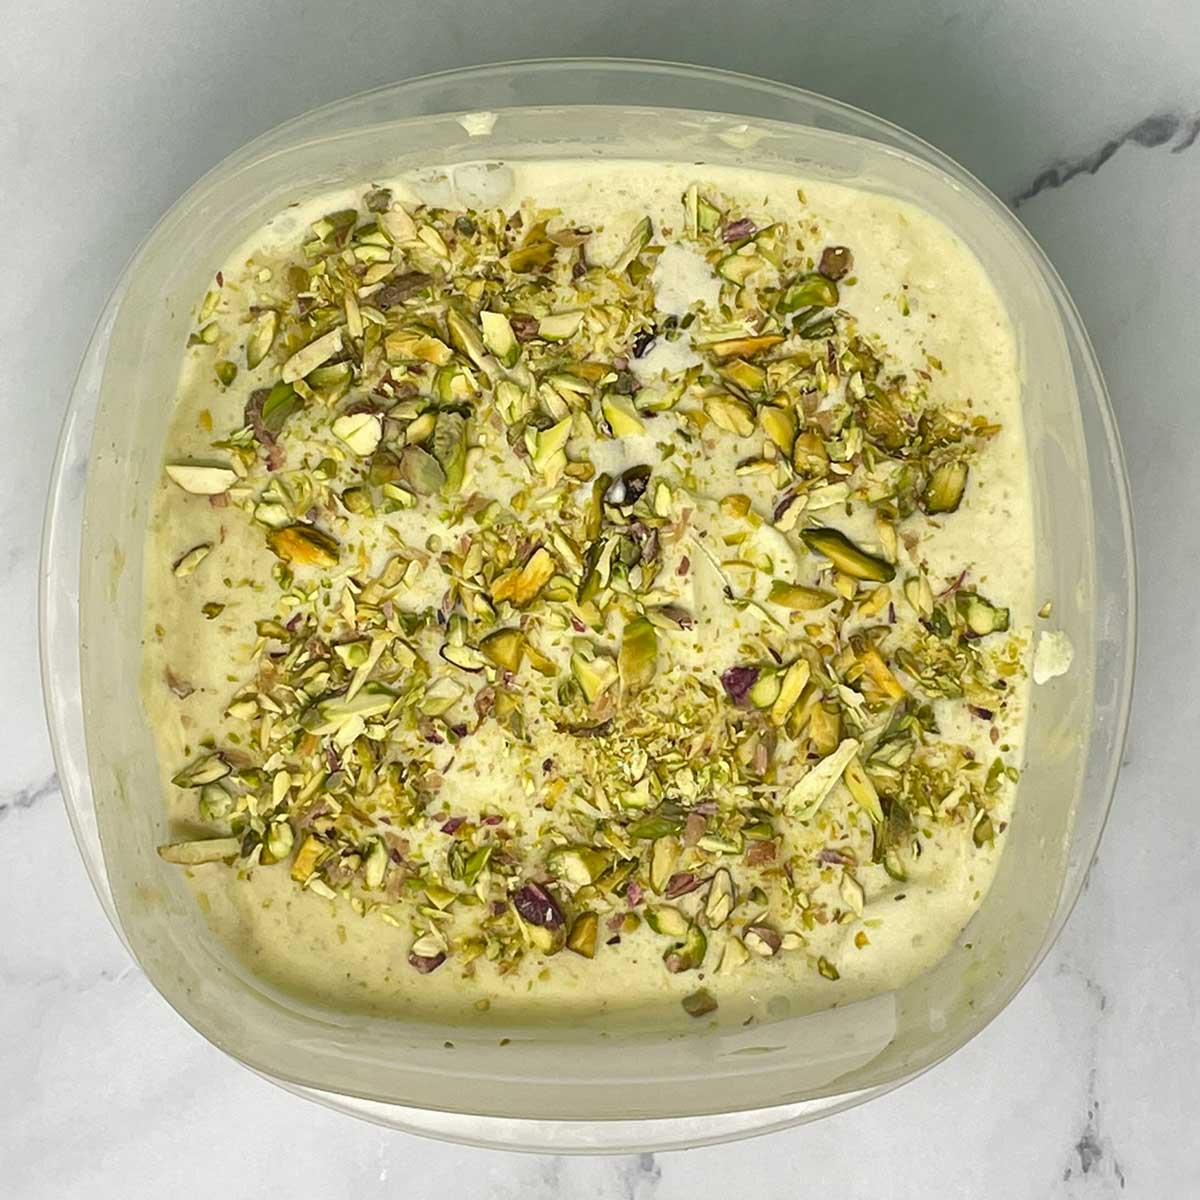 Pistachio ice cream ready to freeze in a container.